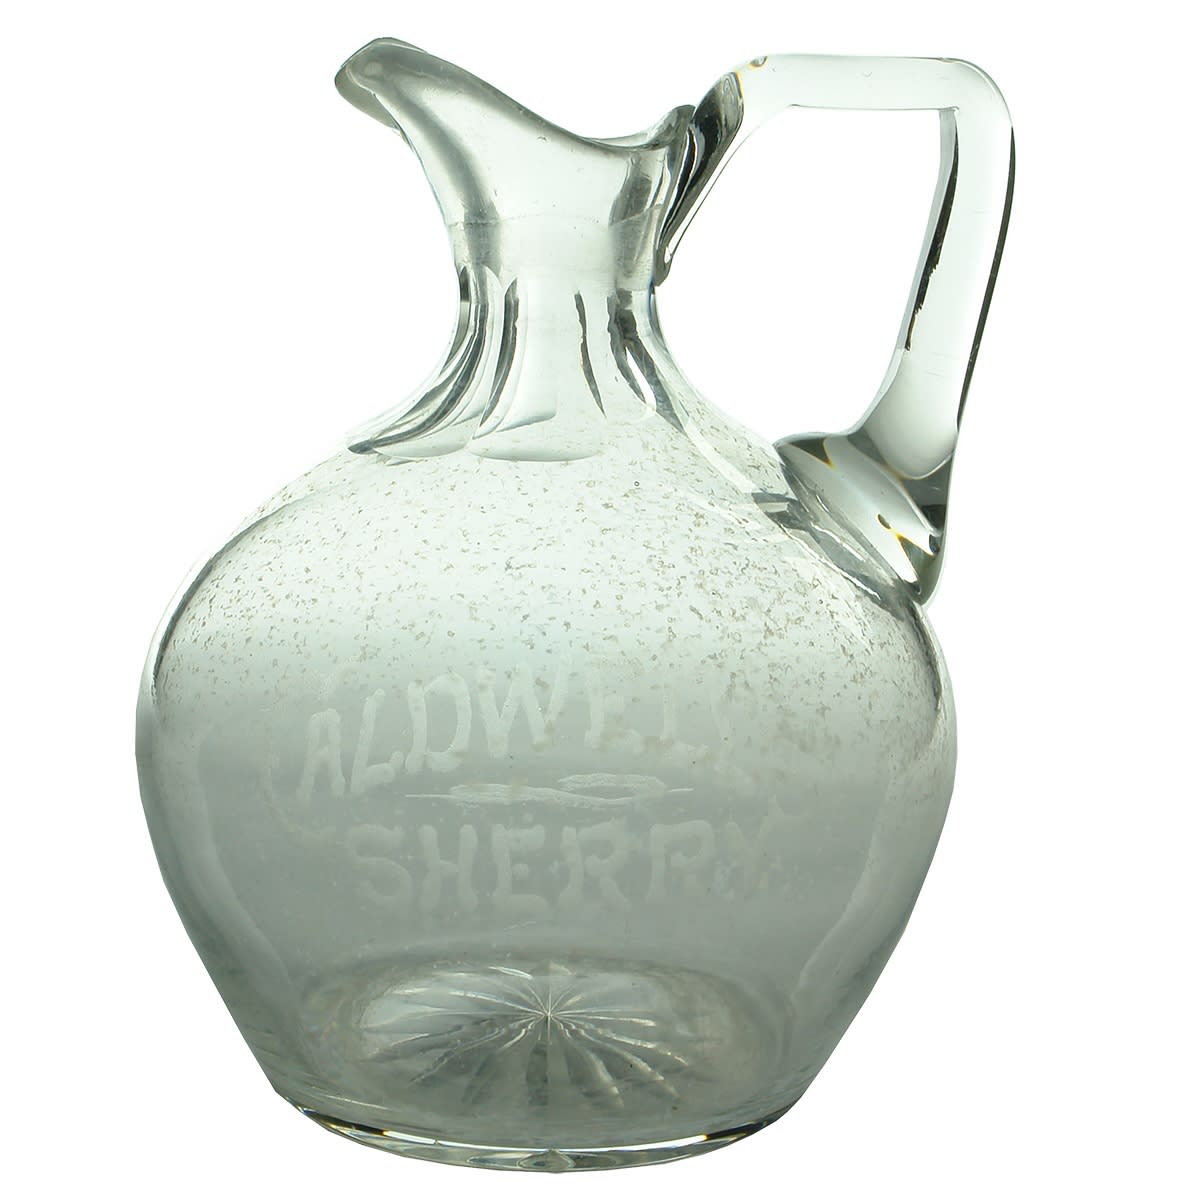 Wine Decanter. Caldwell's Sherry. (New South Wales)